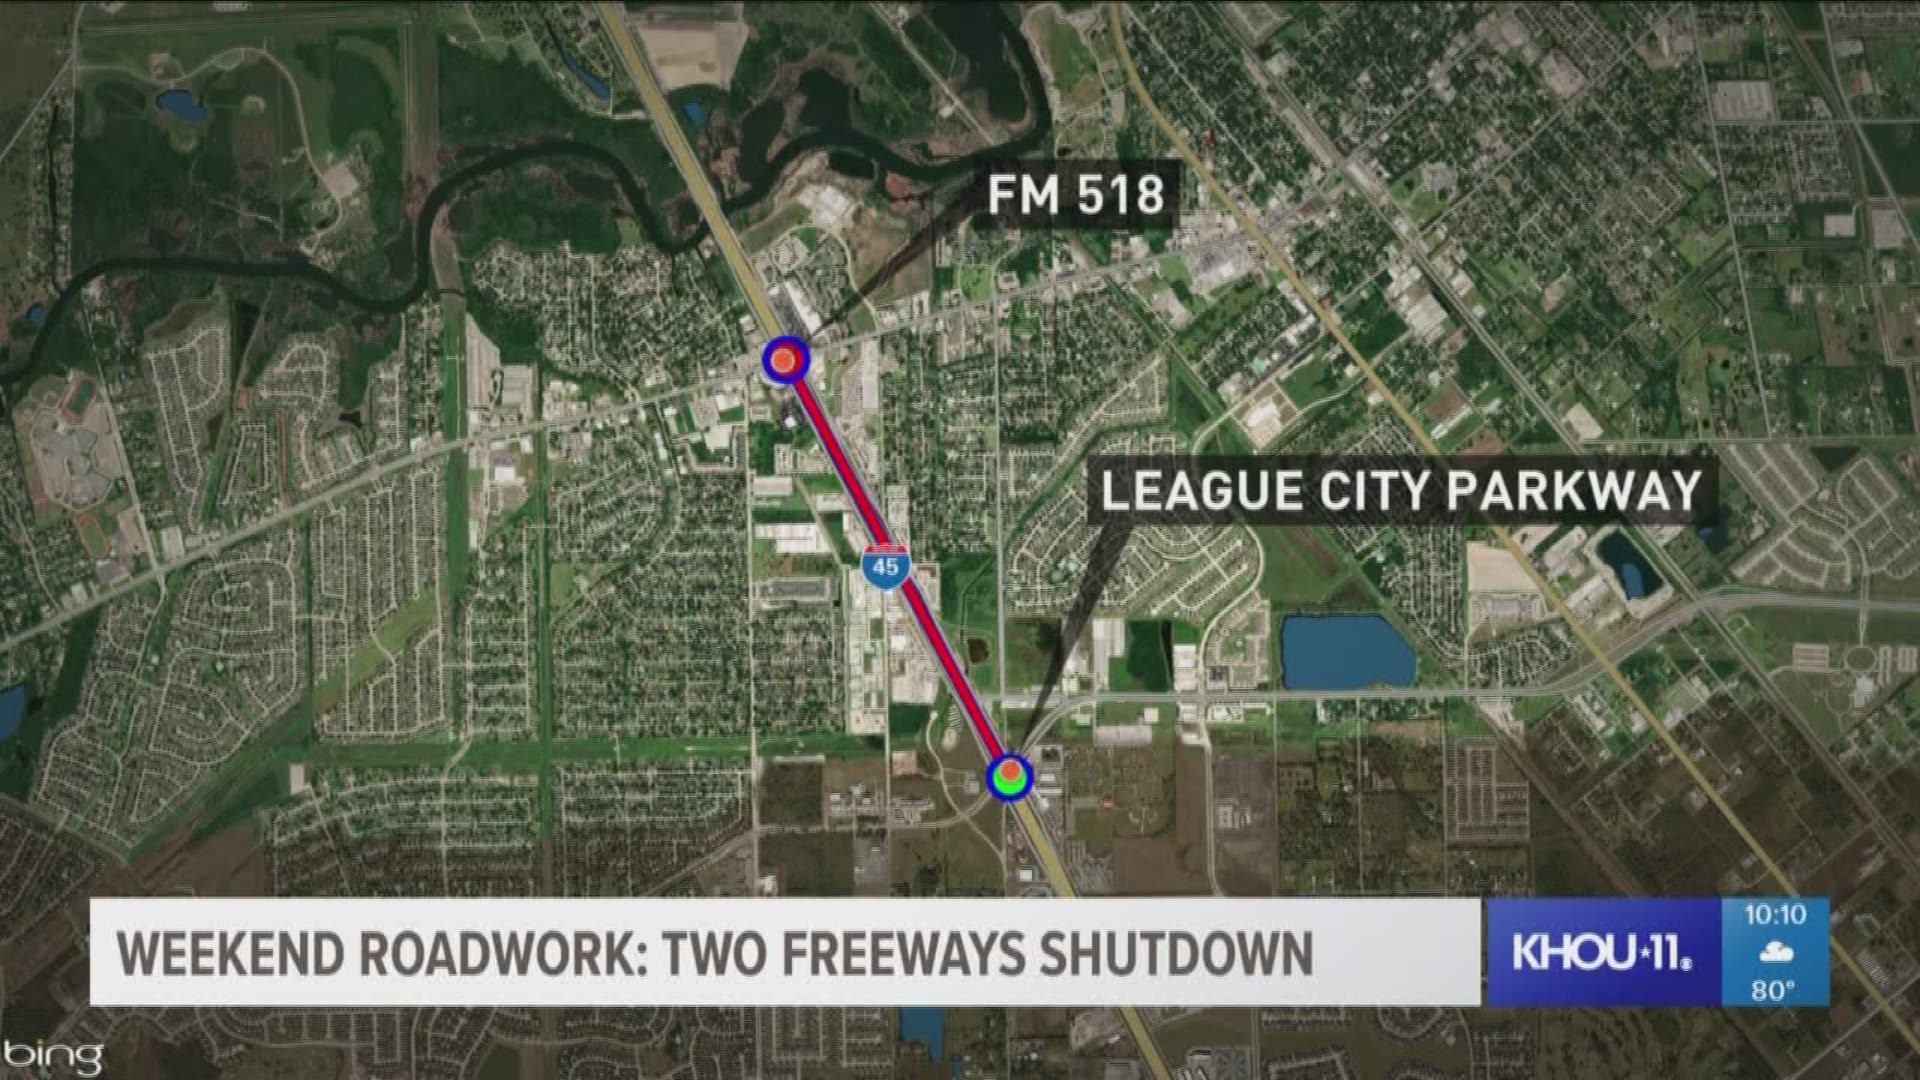 There are two major freeways shutting down for construction this weekend.